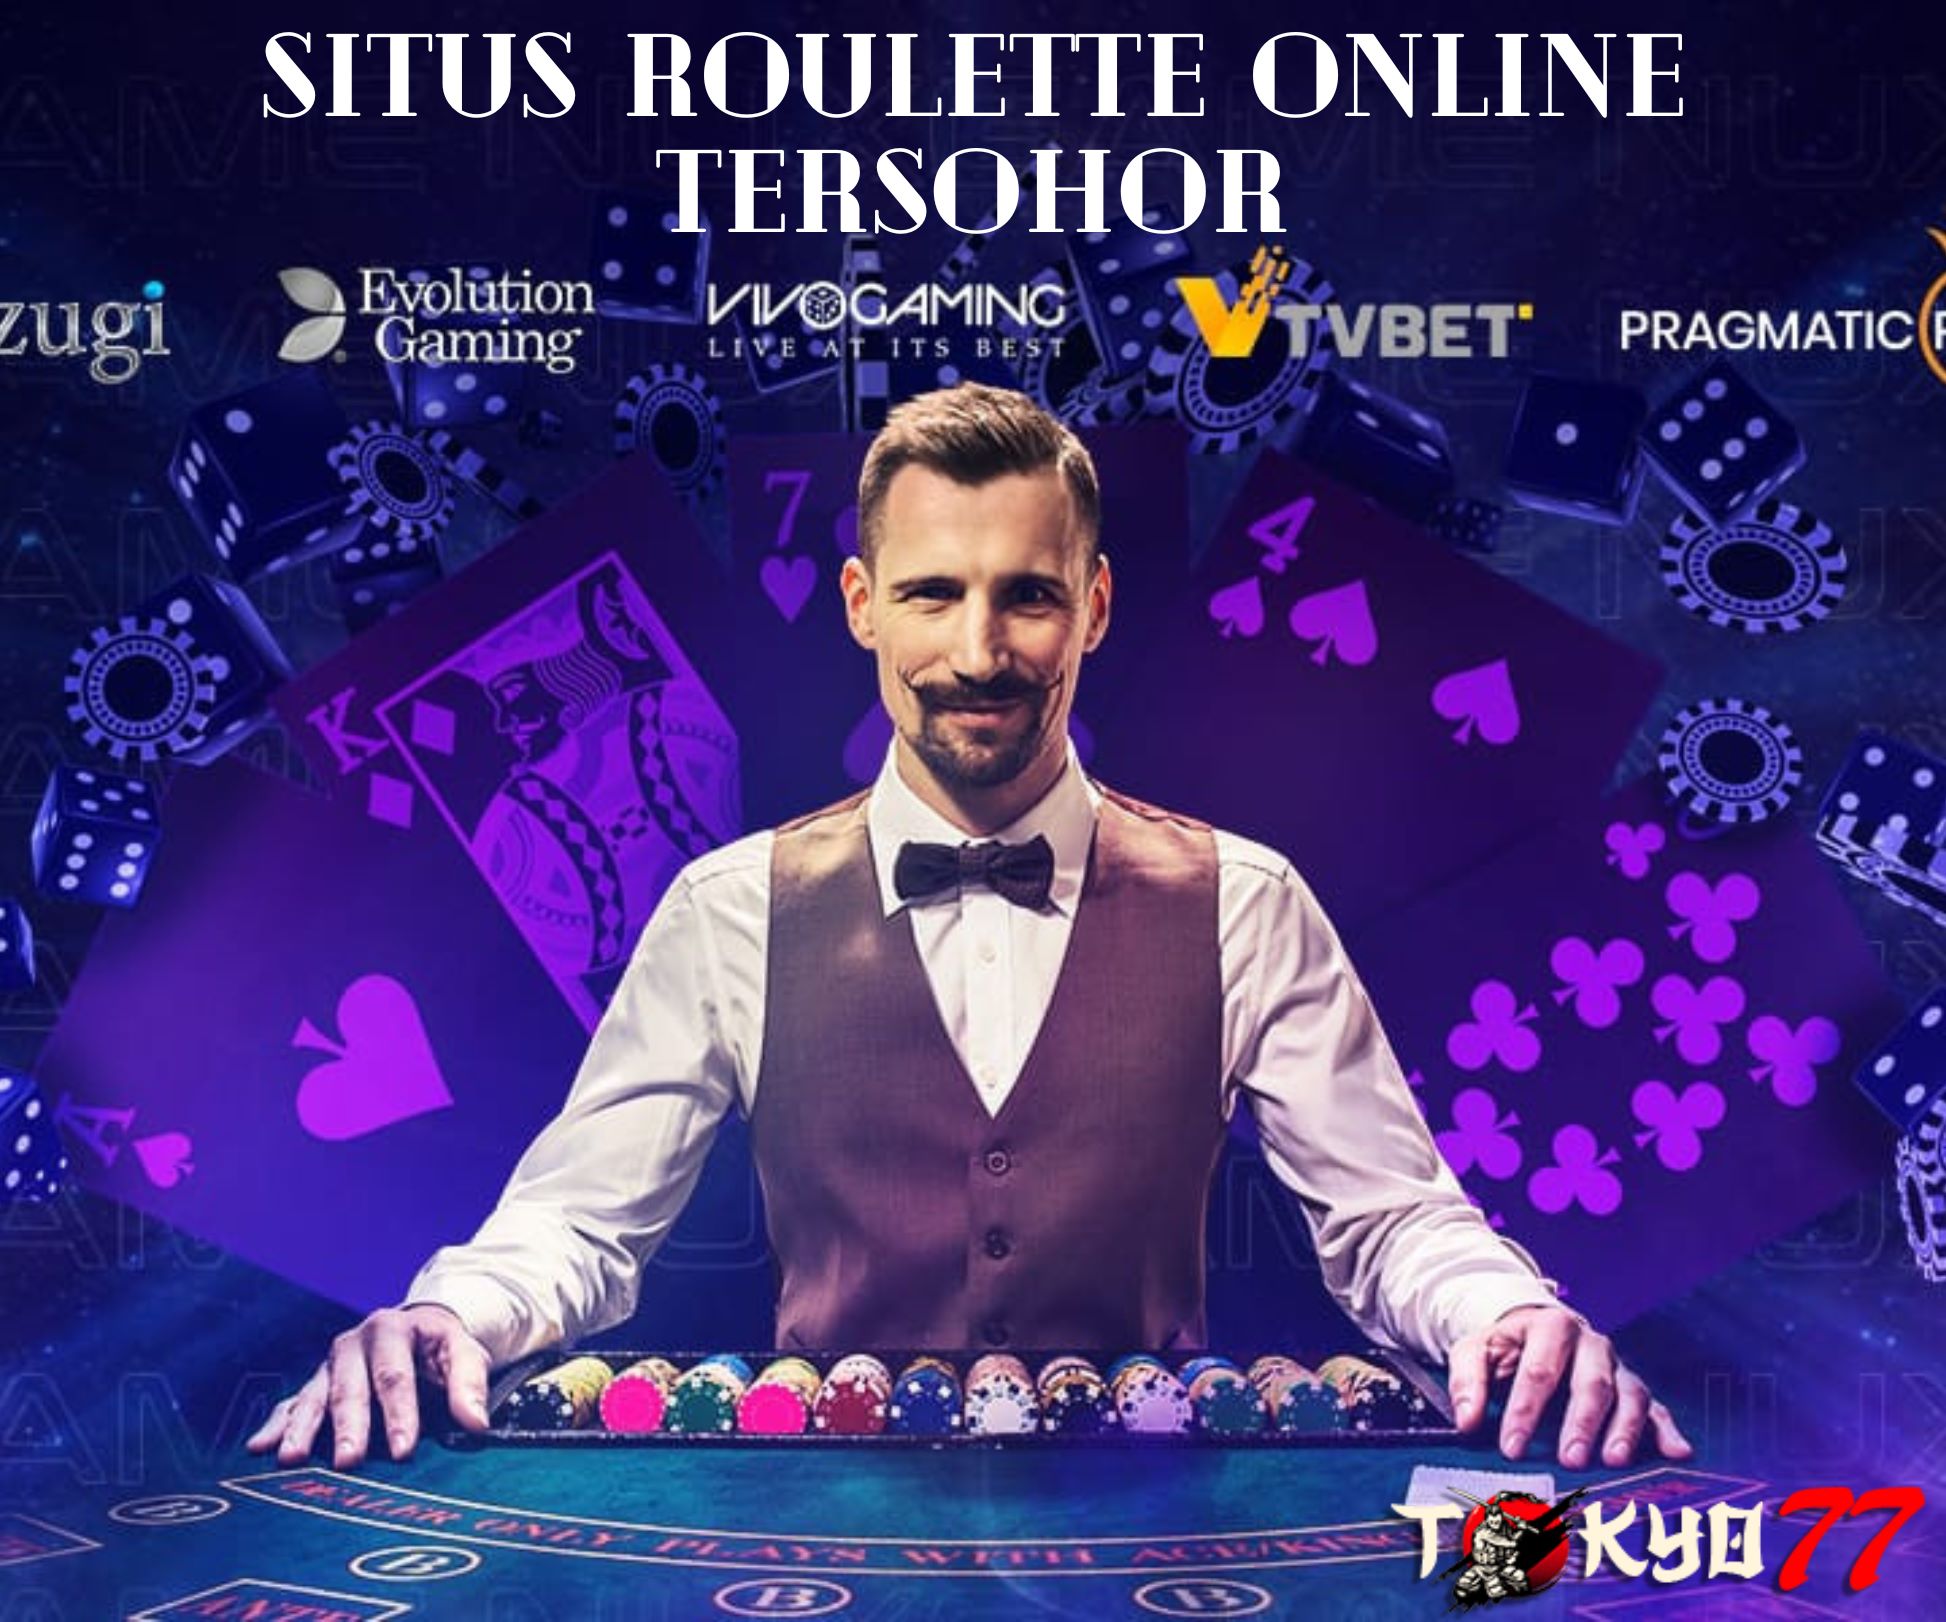 The Most Powerful Hidden Features of Roulette Online